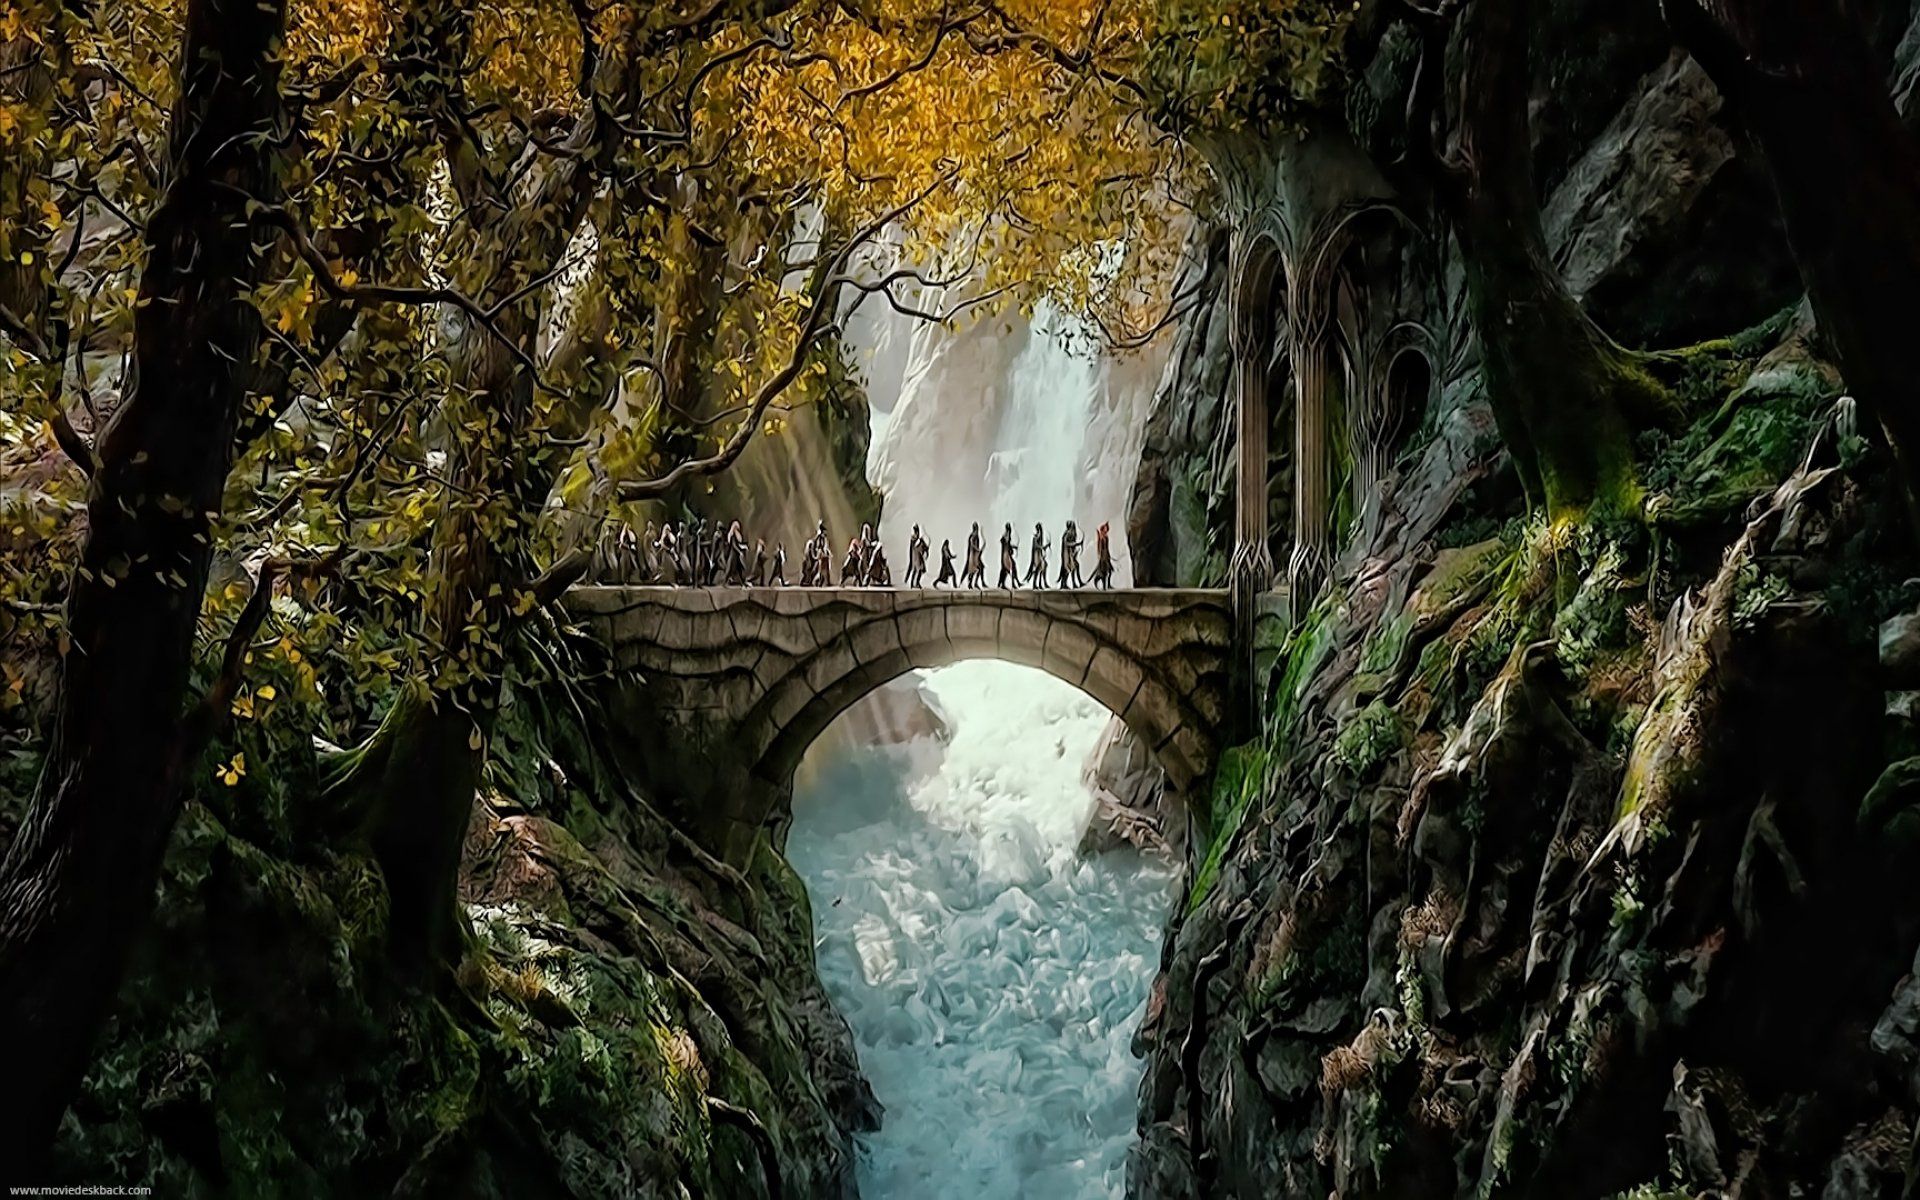 The Lord of the Rings in 4K HDR is Unbelievable